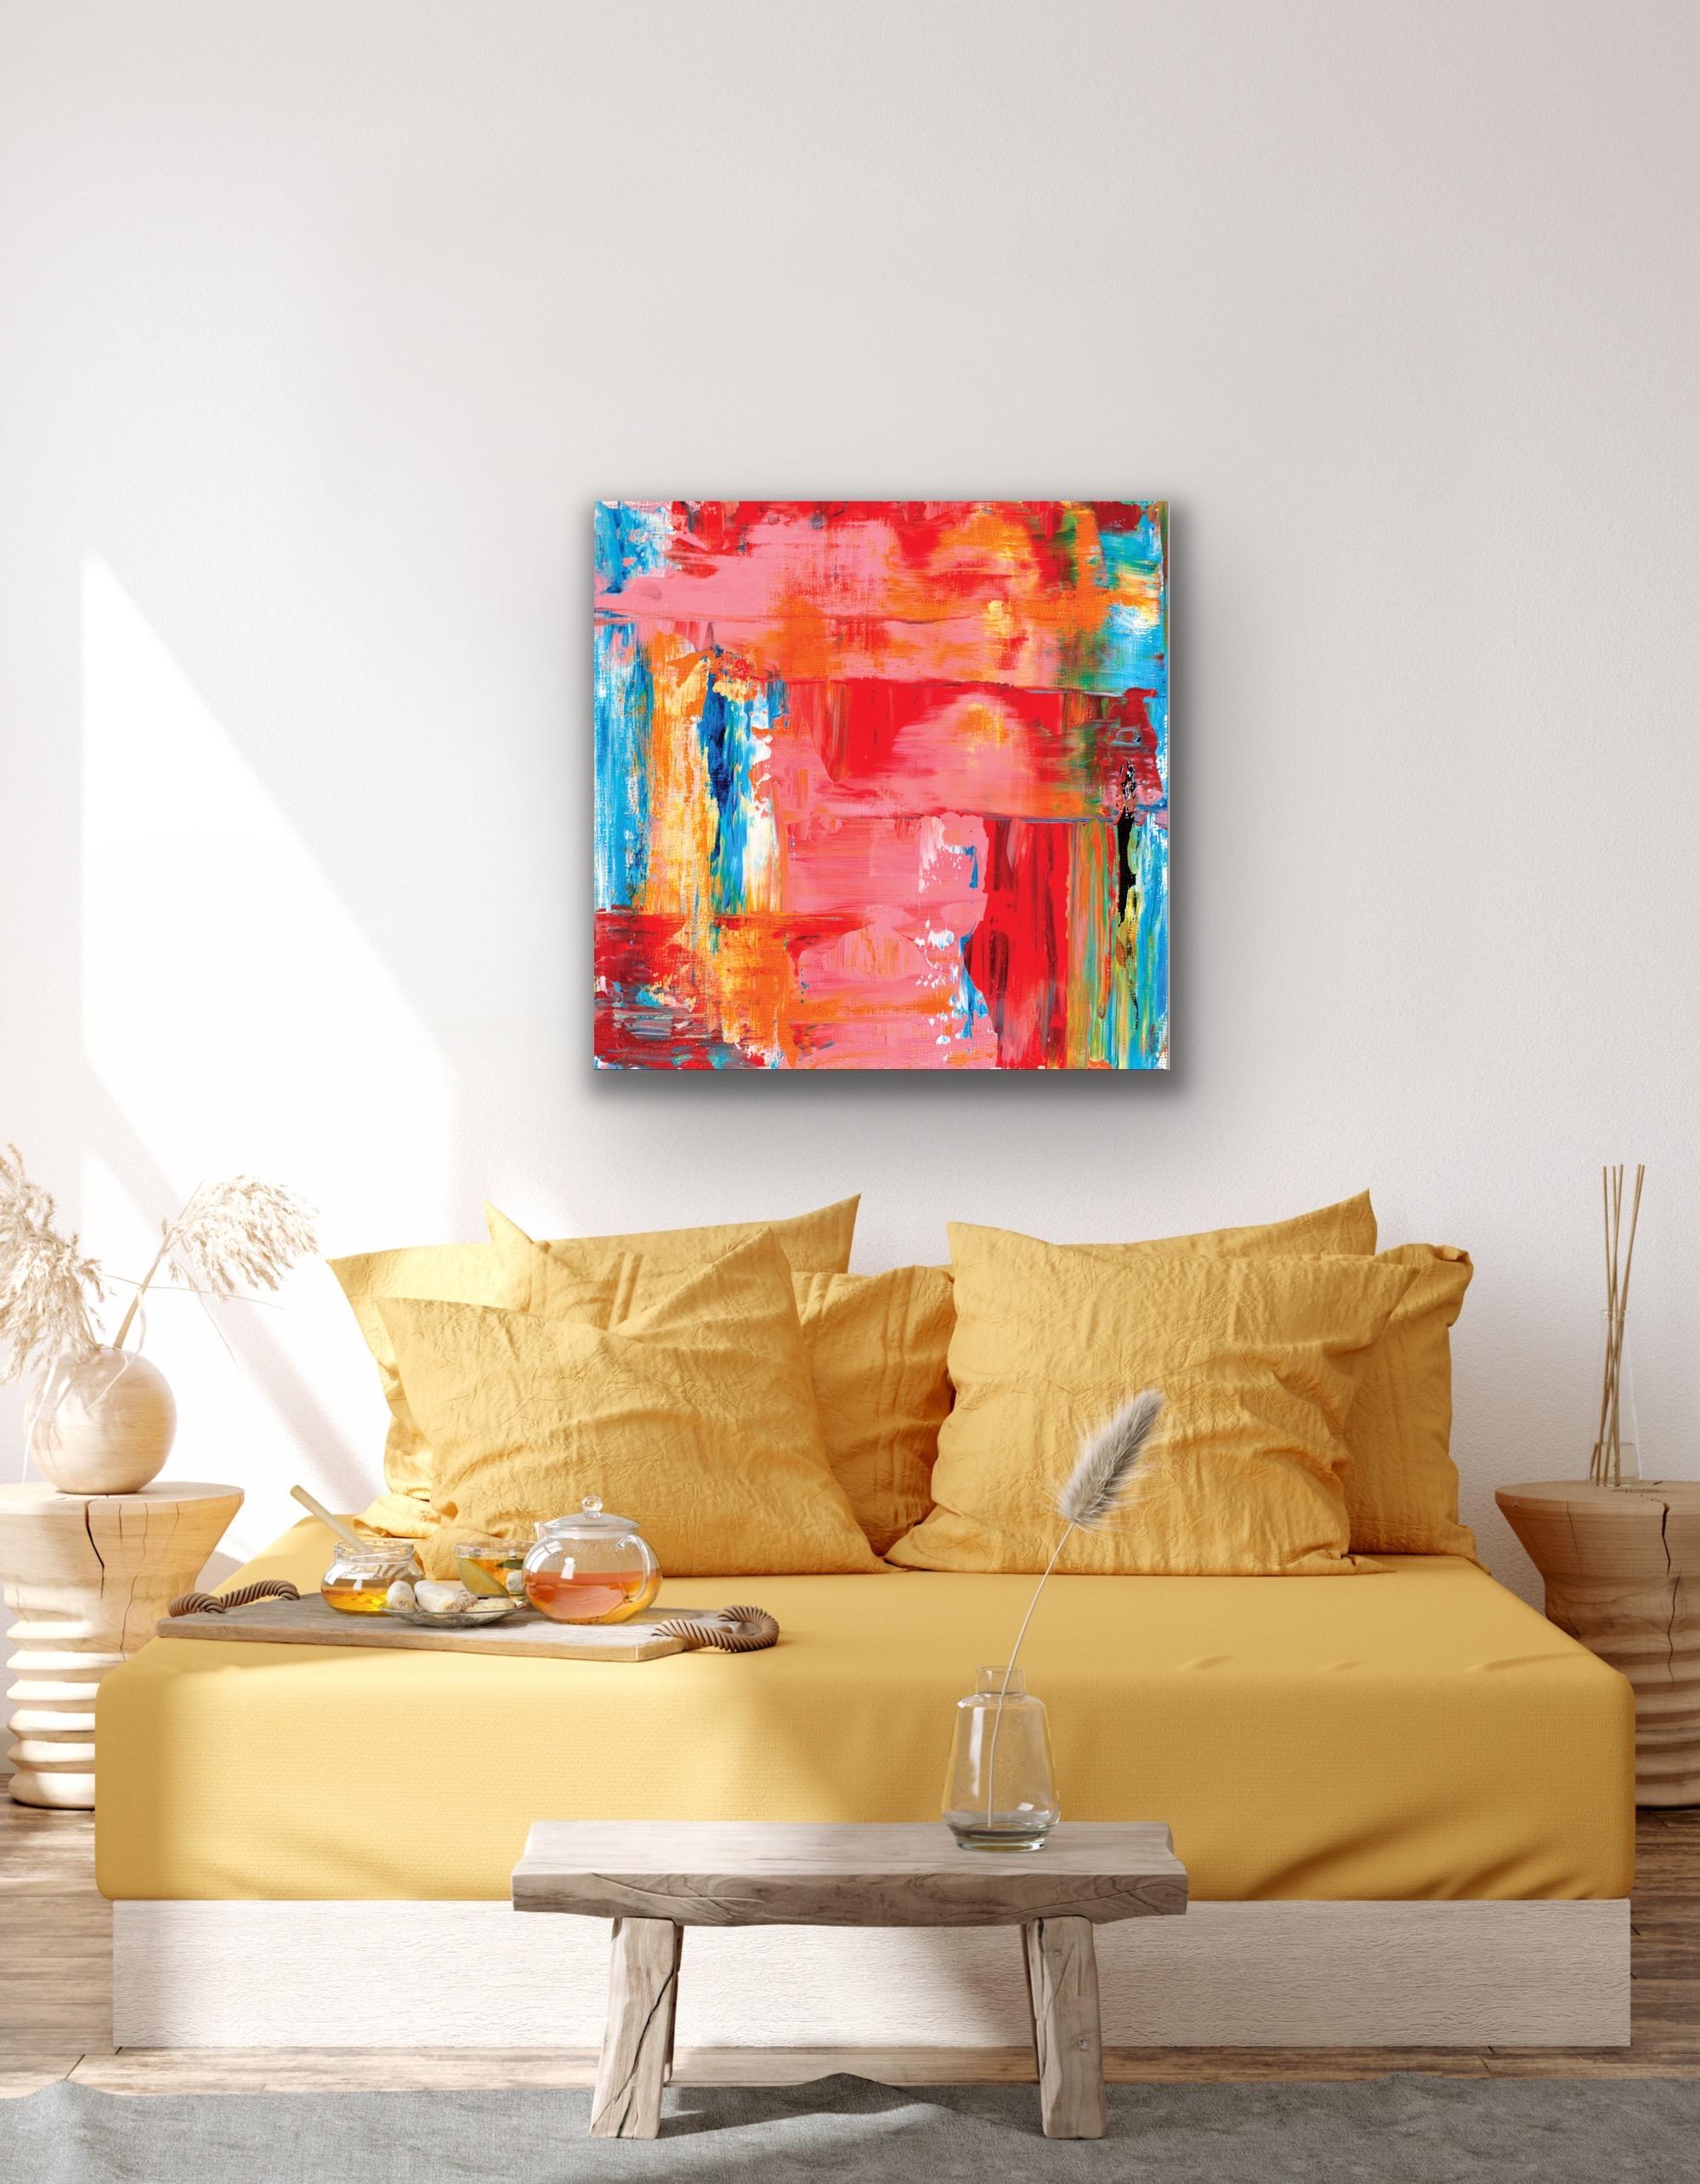 Colorful Abstract Painting, Giclee Print, Metal Wall Art, Indoor Outdoor Decor - Beige Abstract Print by Celeste Reiter